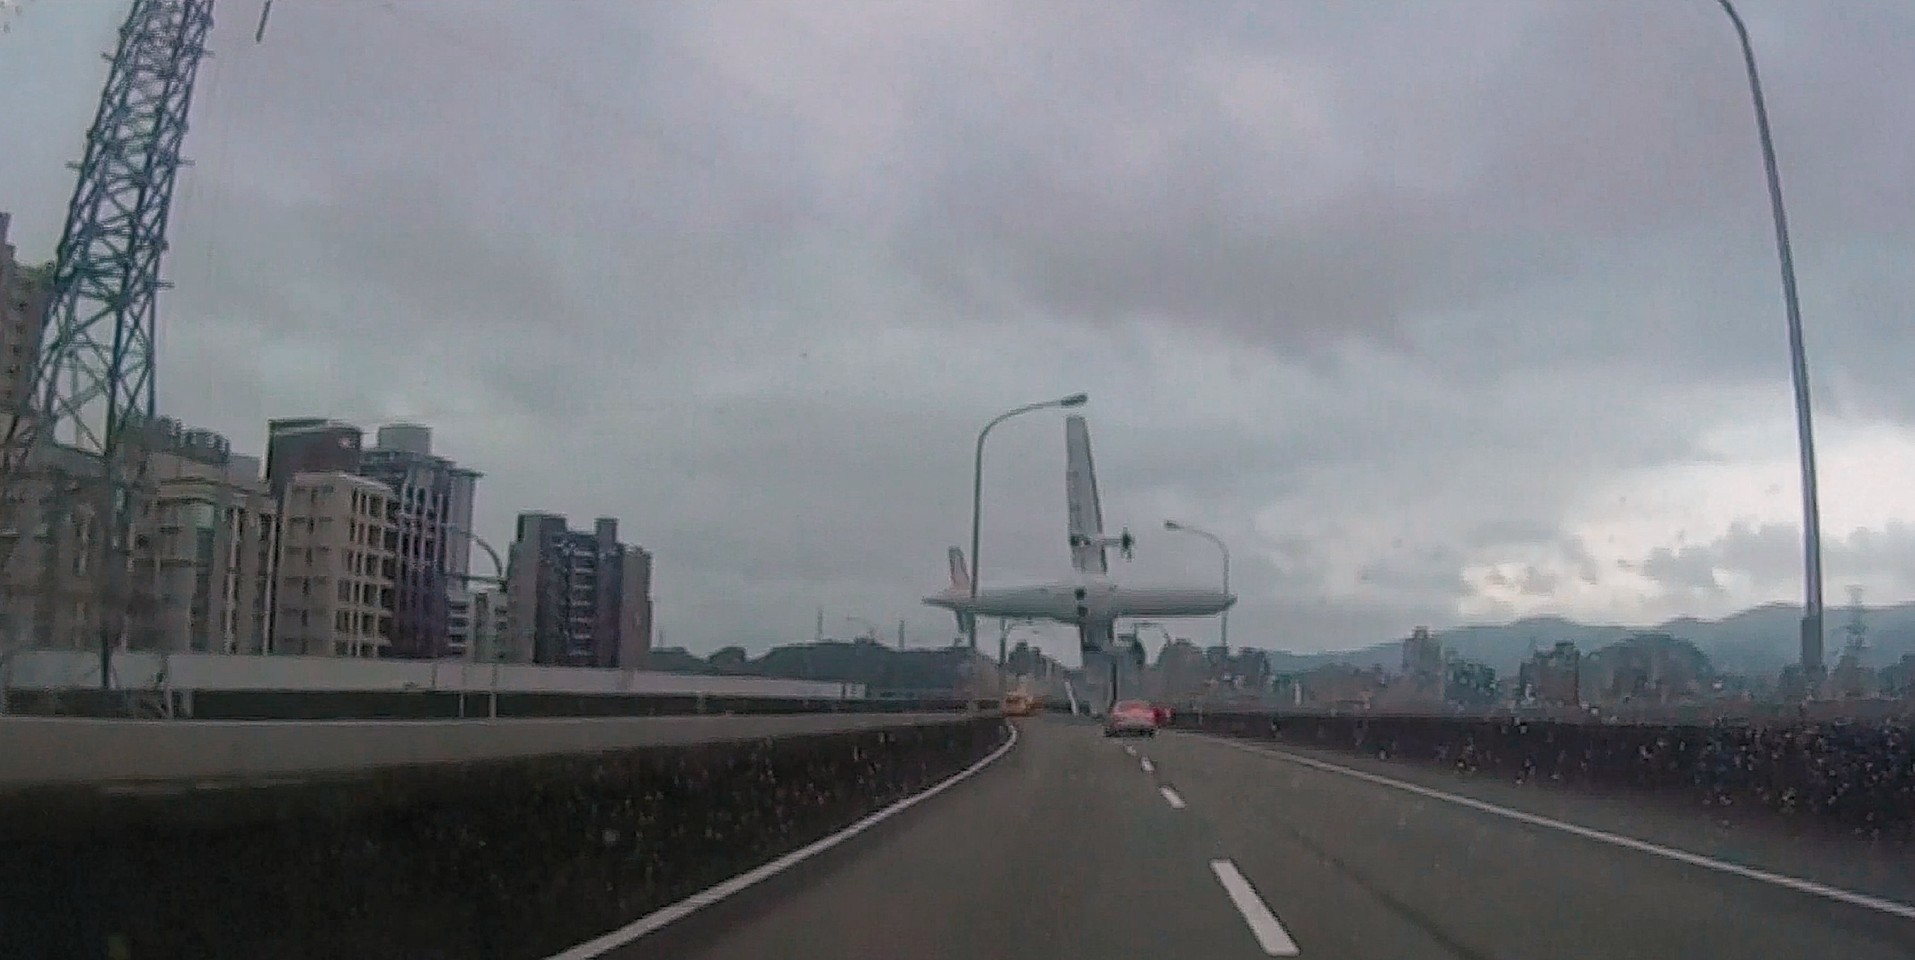 The moment the Taiwanese plane crashed into the motorway